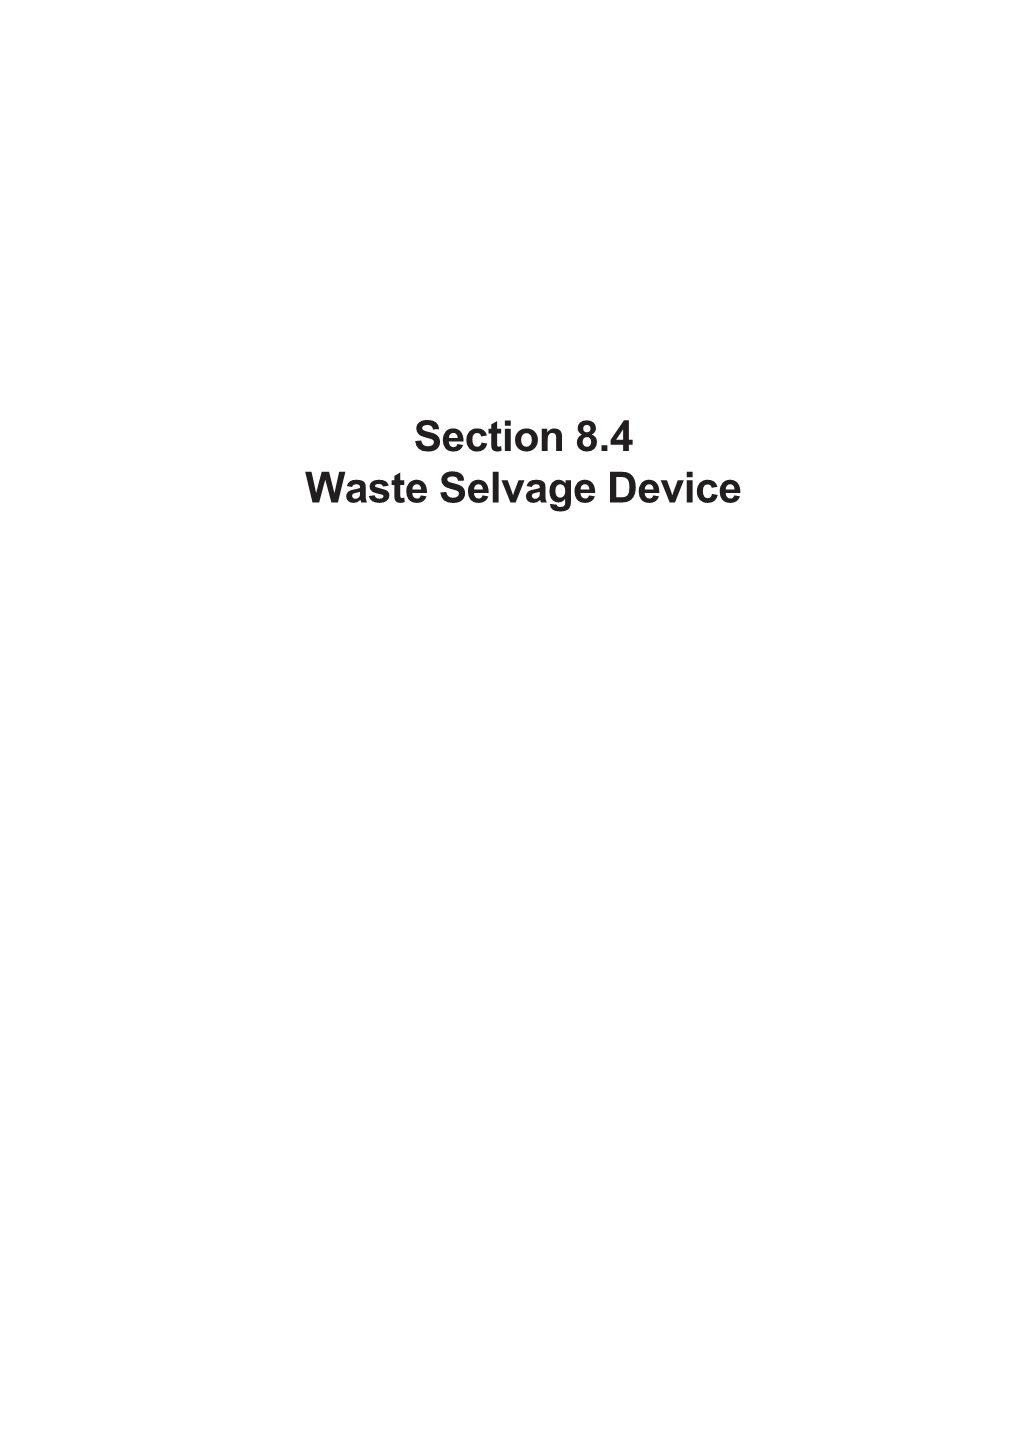 Section 8.4 Waste Selvage Device